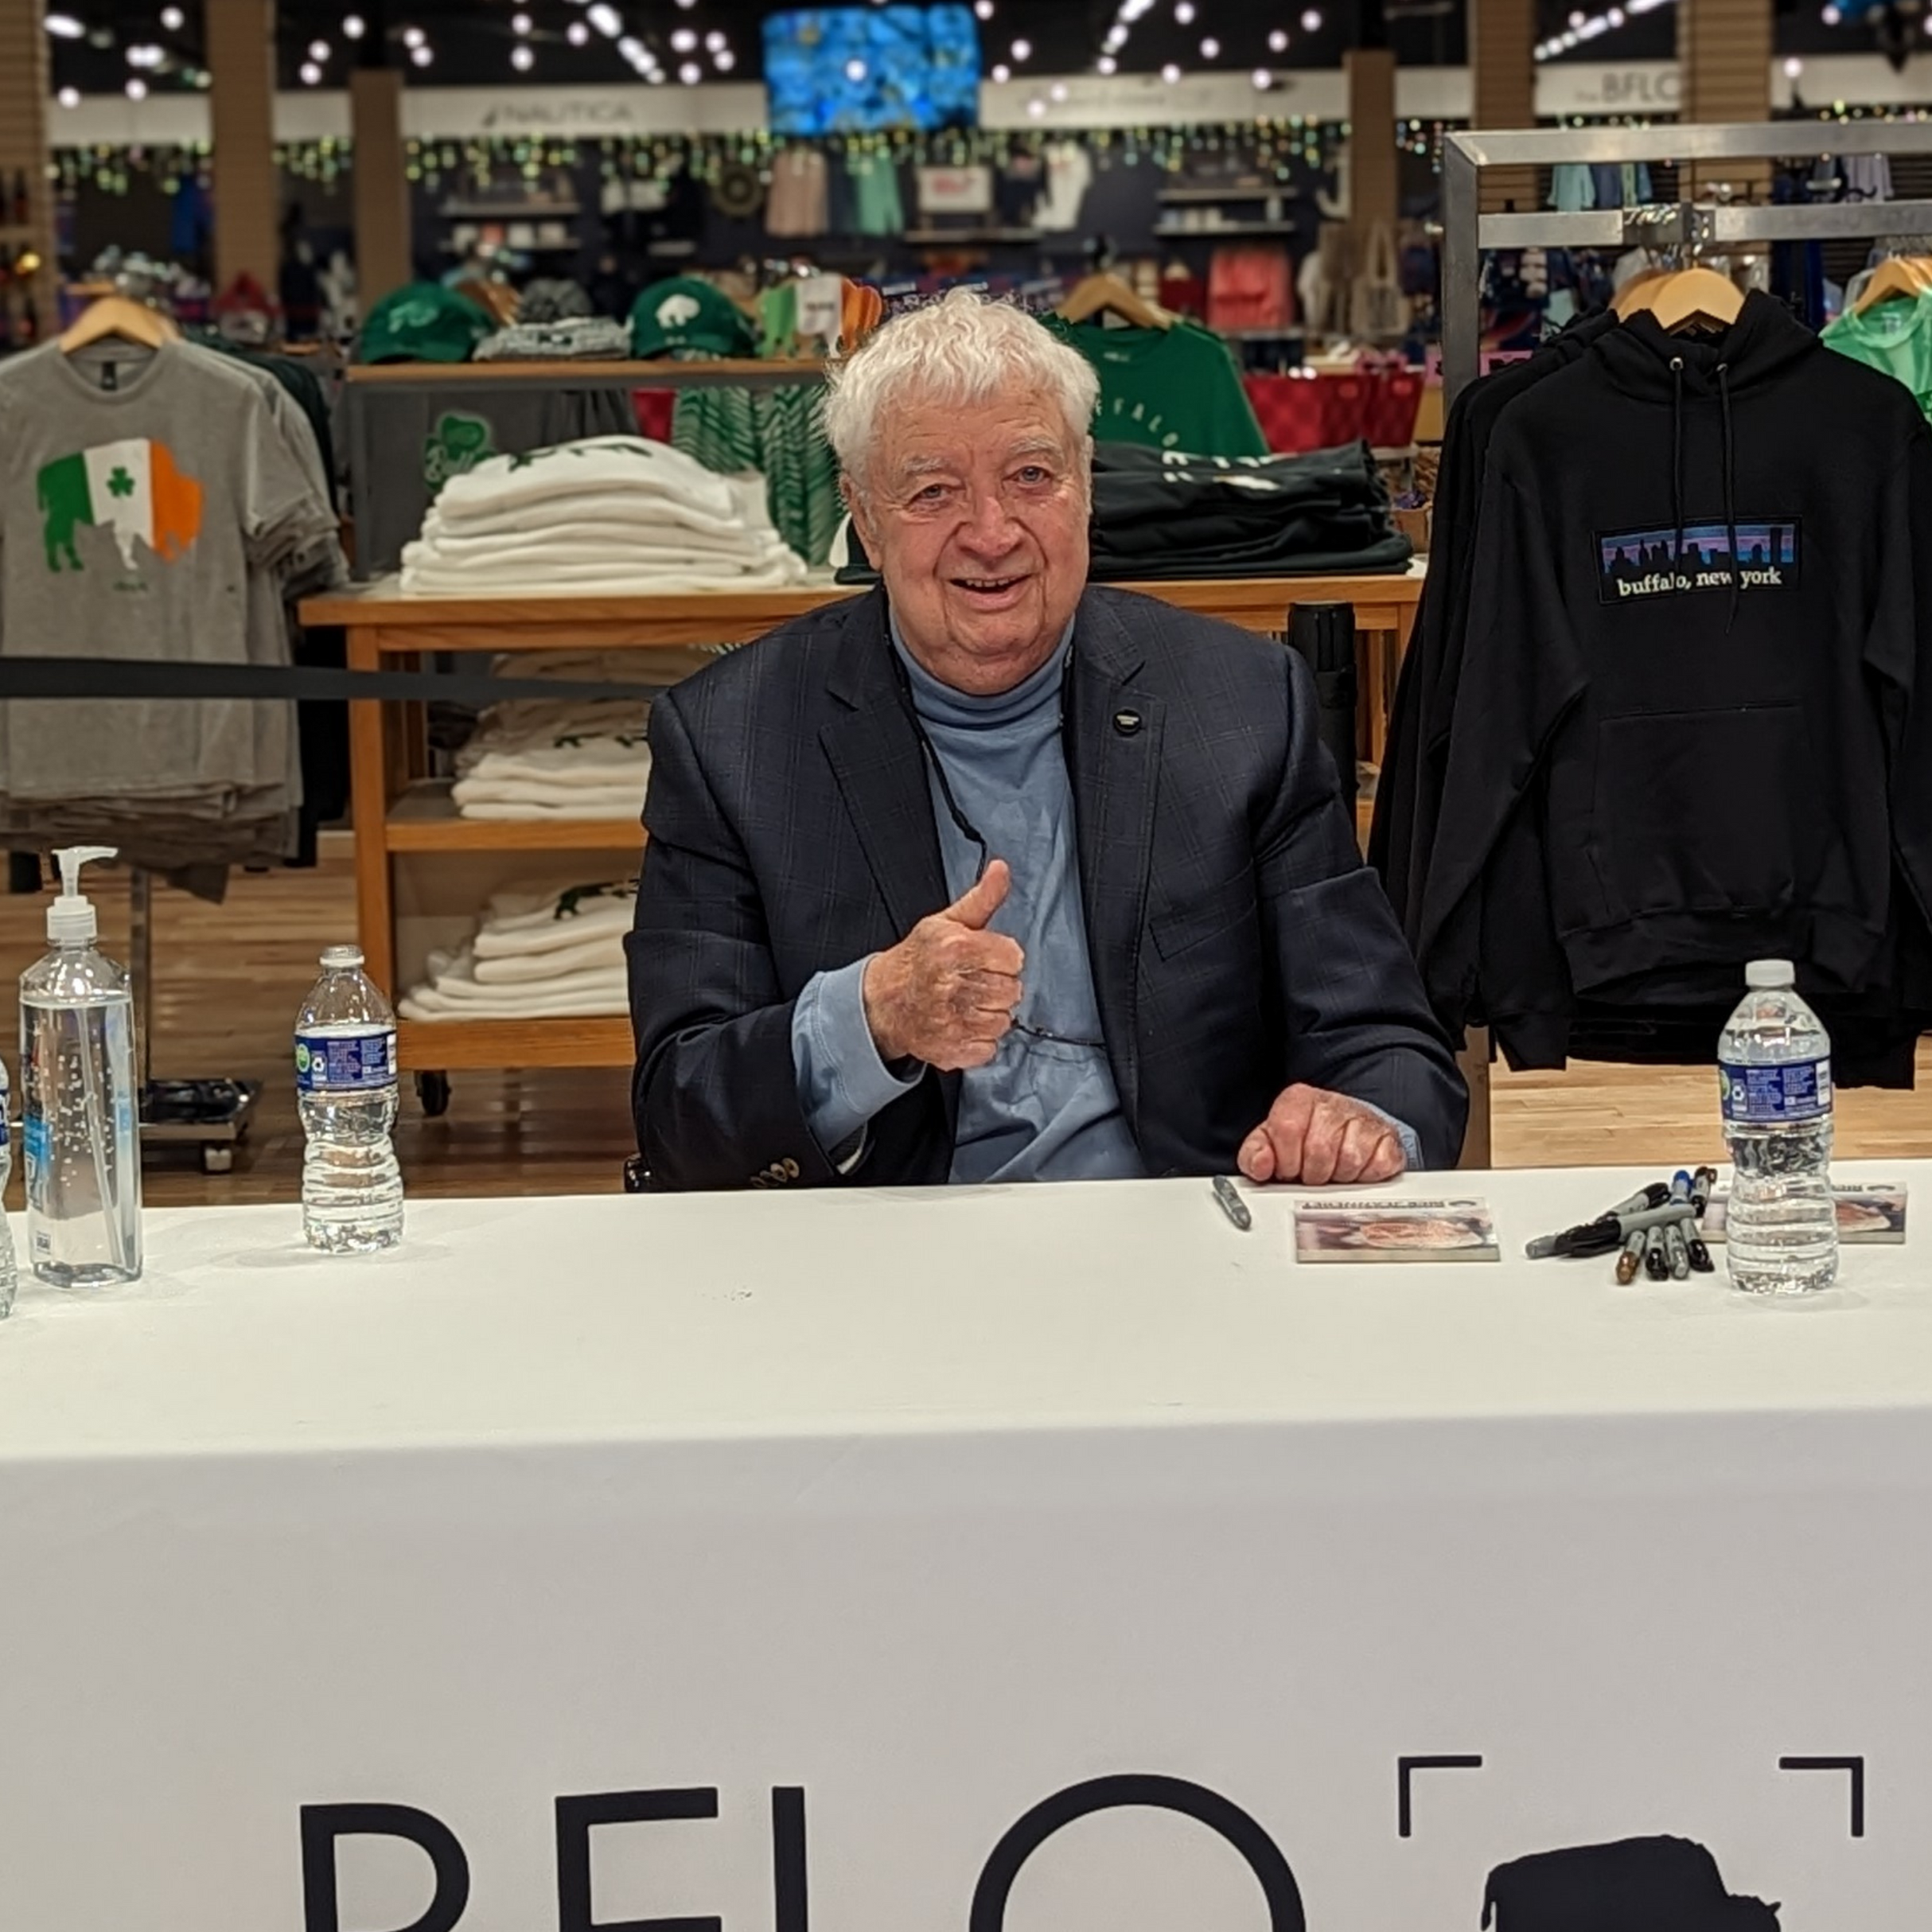 rick jeanneret, buffalo sabres announcer, at the bflo store